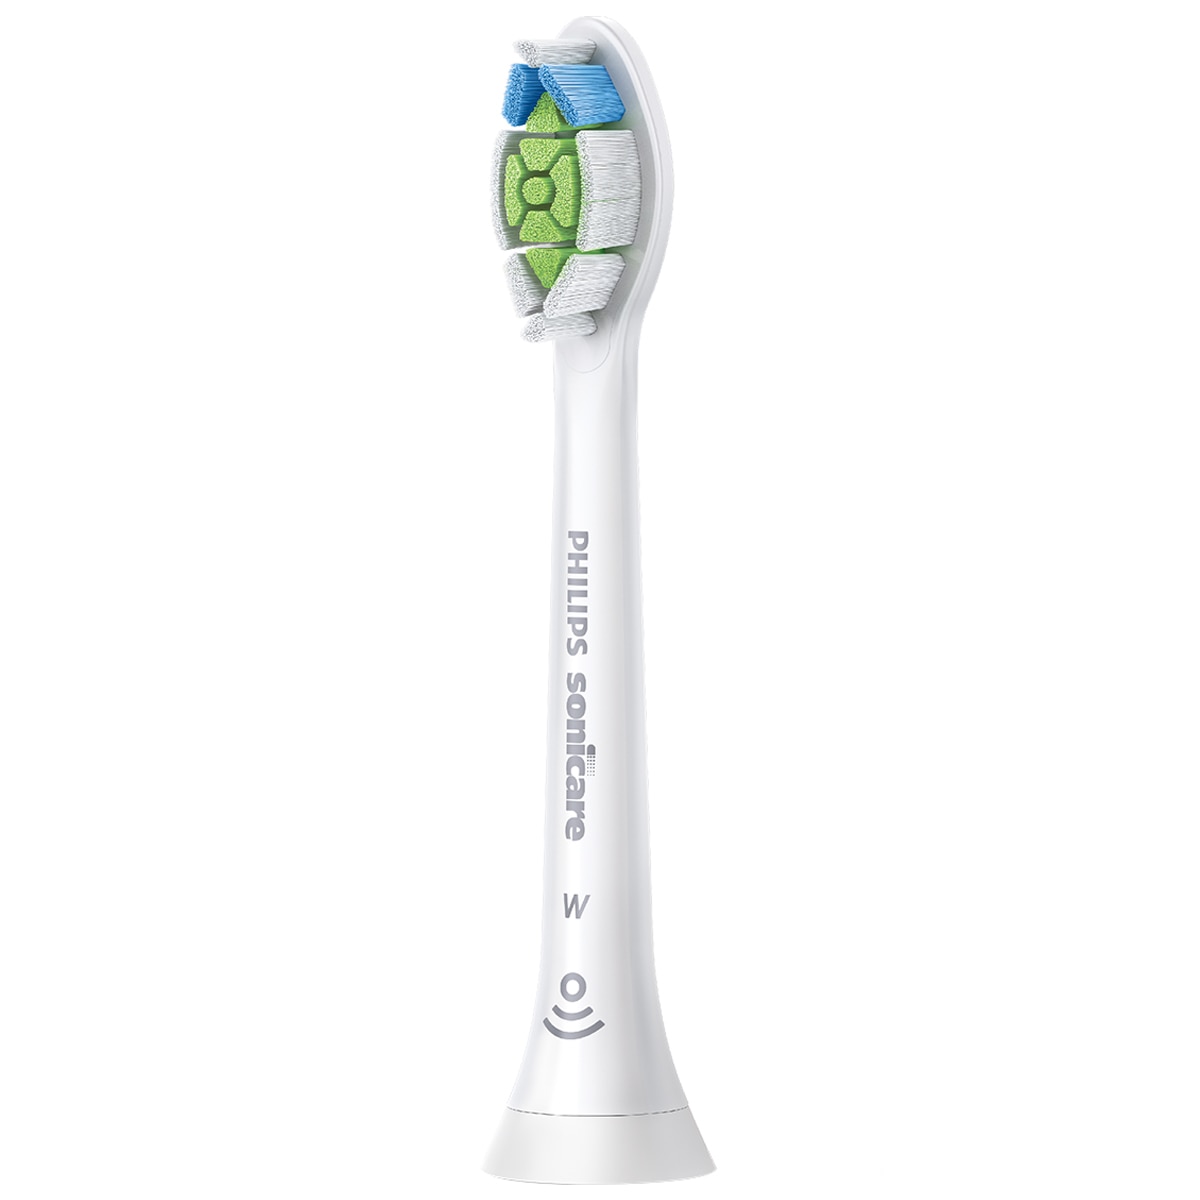 Philips Sonicare Diamondclean Replacement Heads 6 pack - White